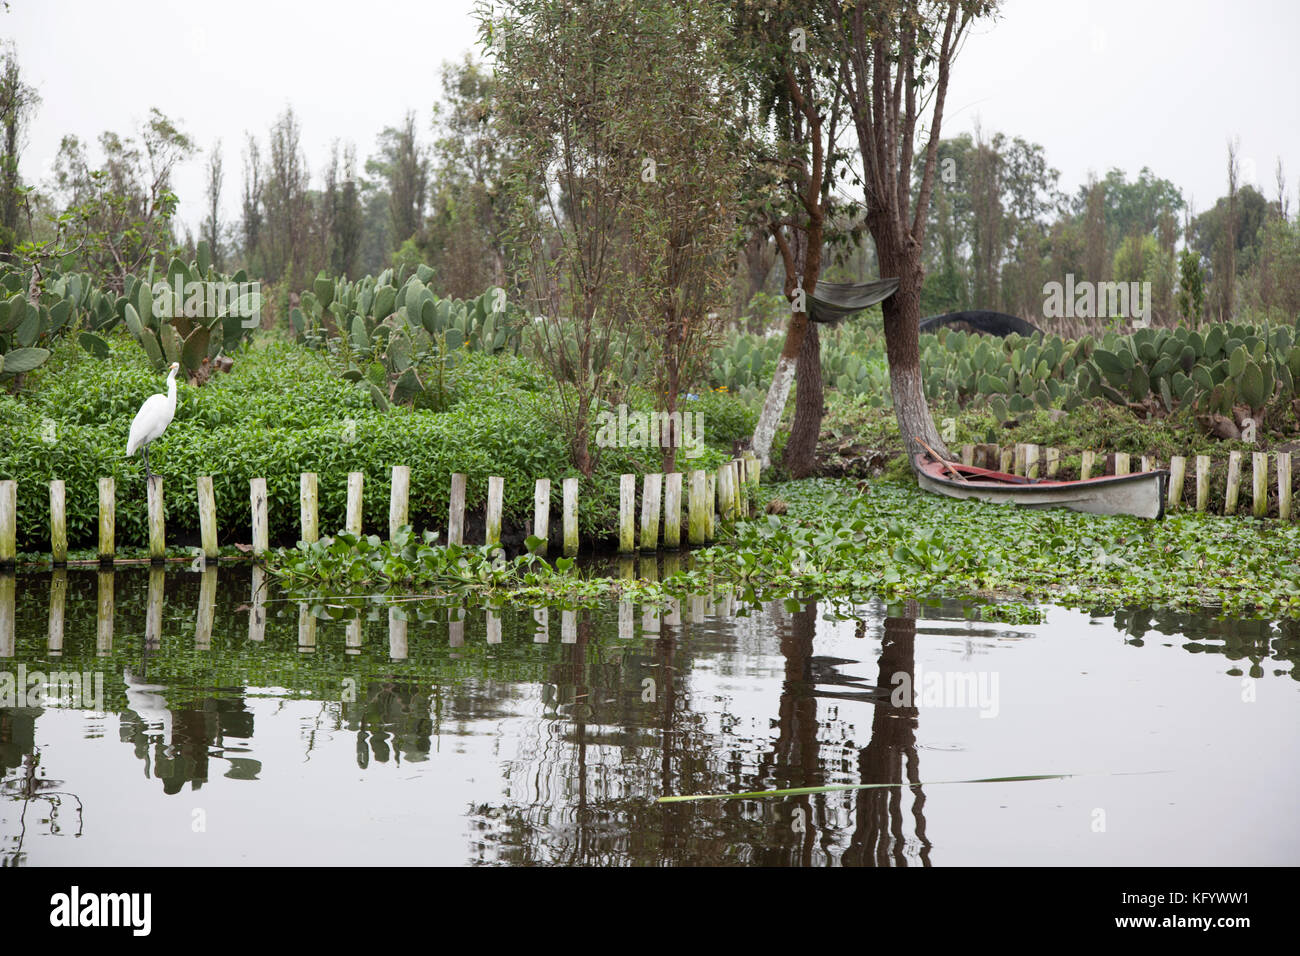 Chinampas, 2200 hectares of farmland on the southern shore of Lake Xochimilco, part of a vast network of lakes and canals that date to the Aztecs. Stock Photo